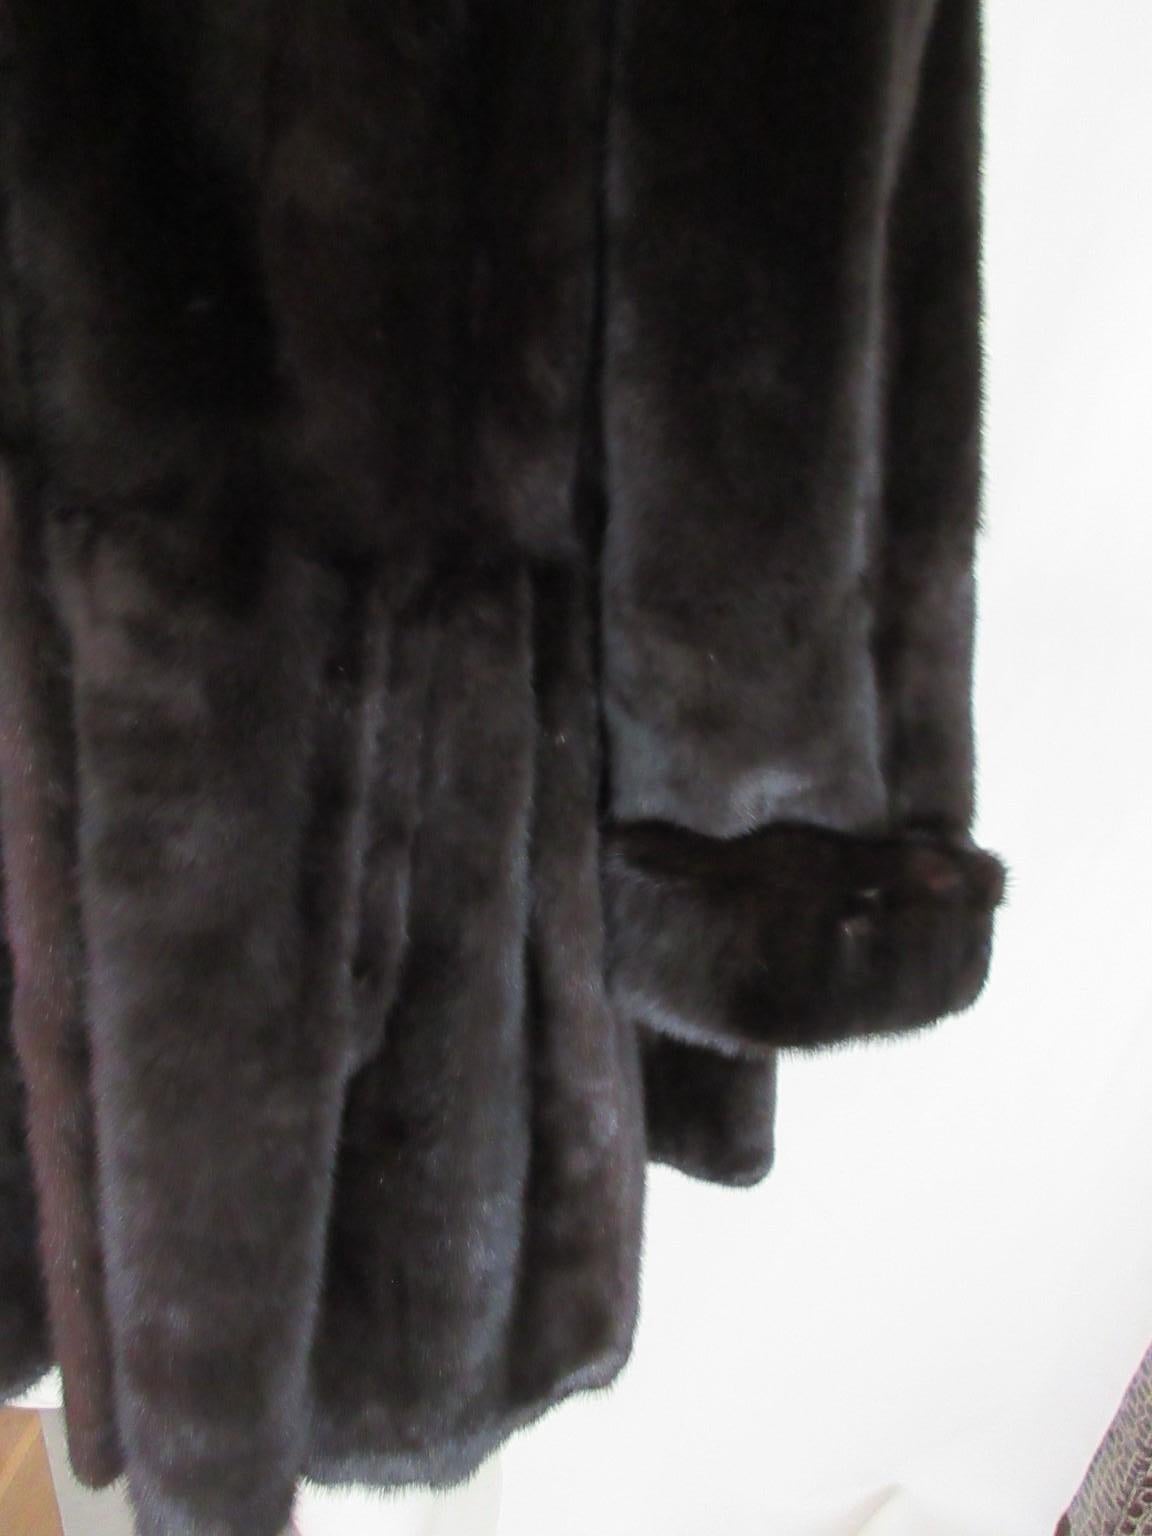 This flared dark brown mink coat is made of soft quality fur with a special lining

We offer more luxury fur items, view our front store

Details:
Very soft quality mink
with 3 closing hooks, 
2 pockets and 1 inside pocket.
Beautiful lined
These